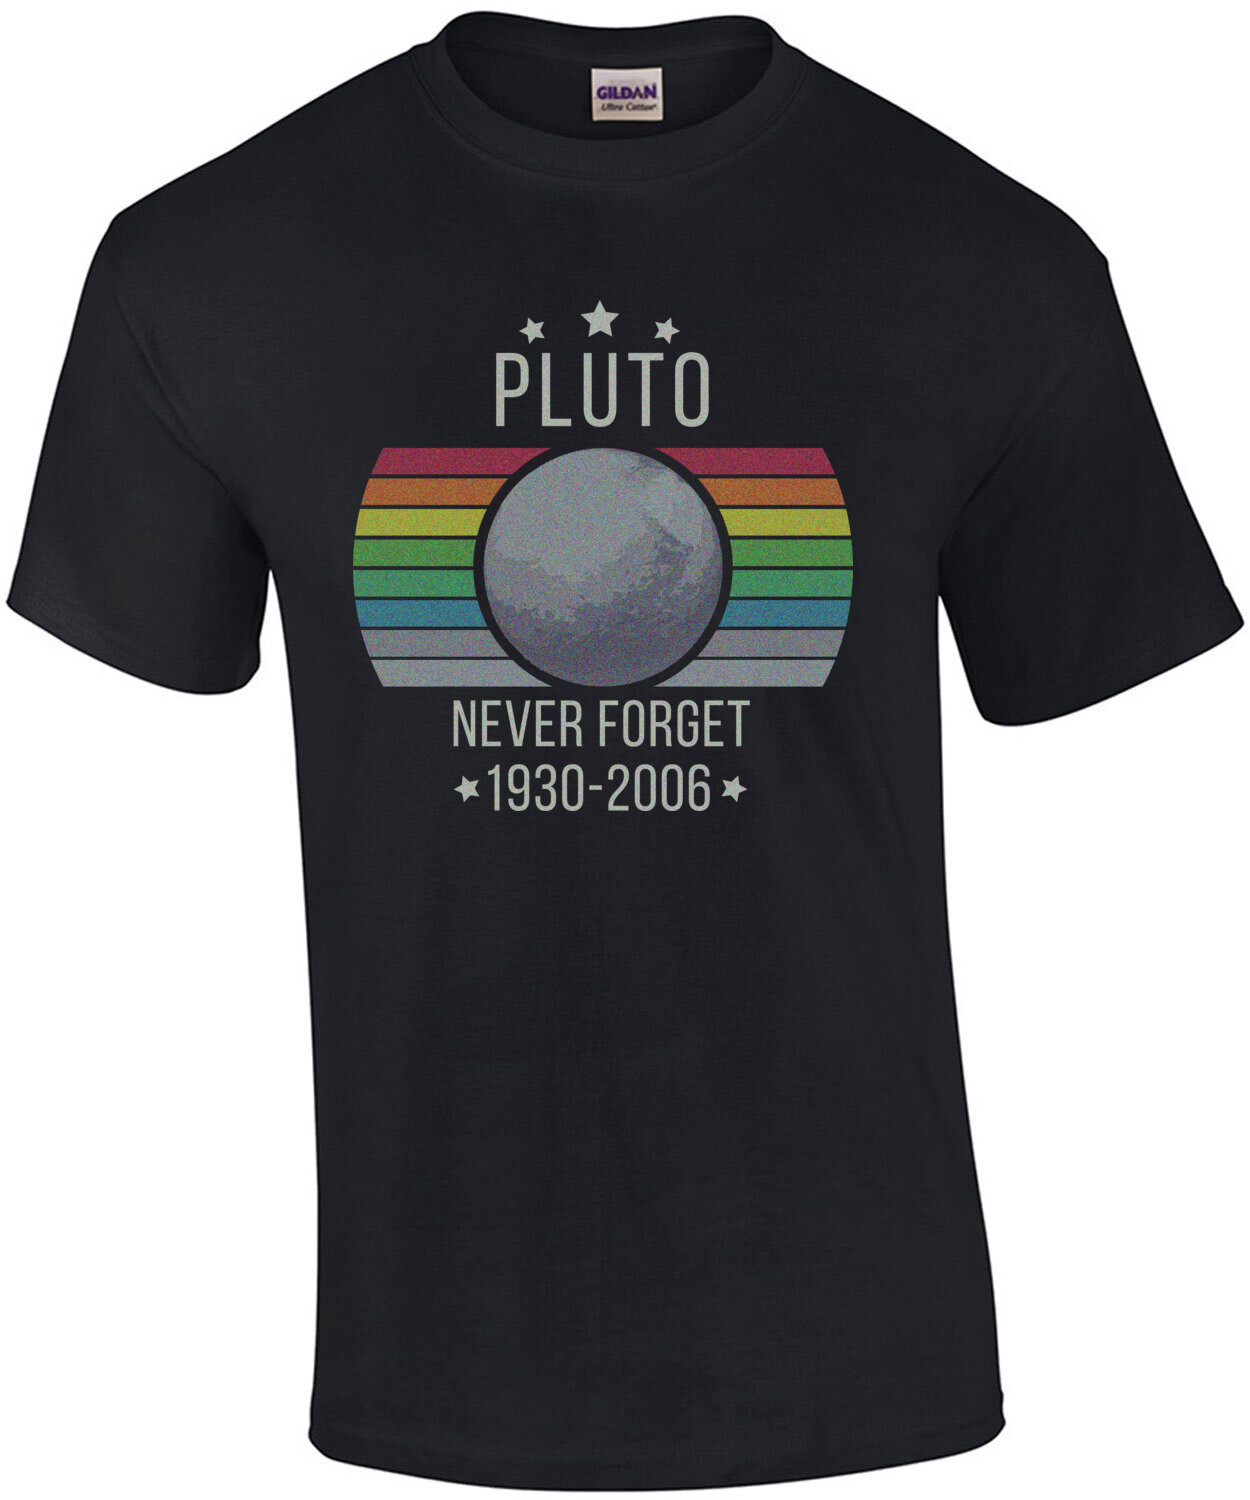 Pluto - Never Forget - 1930 - 2006